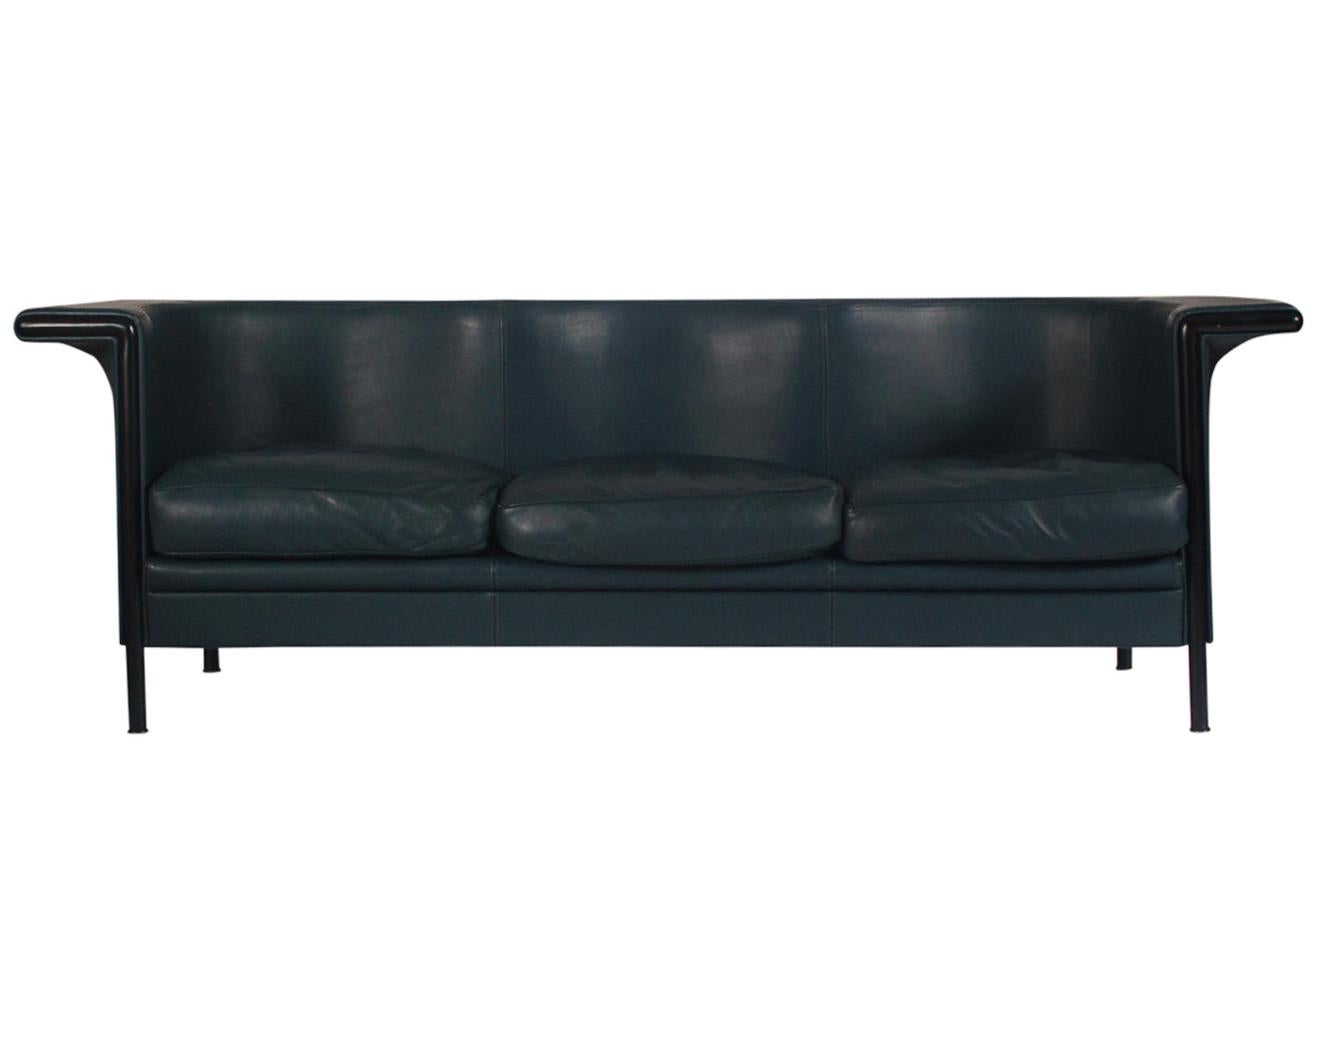 A sleek Postmodern design by Antonio Citterio and produced by Moroso in the 1990s. It features a black satin powder-coated frame with a dark blue-green leather. Fully labeled. Well cared for and free of damages.